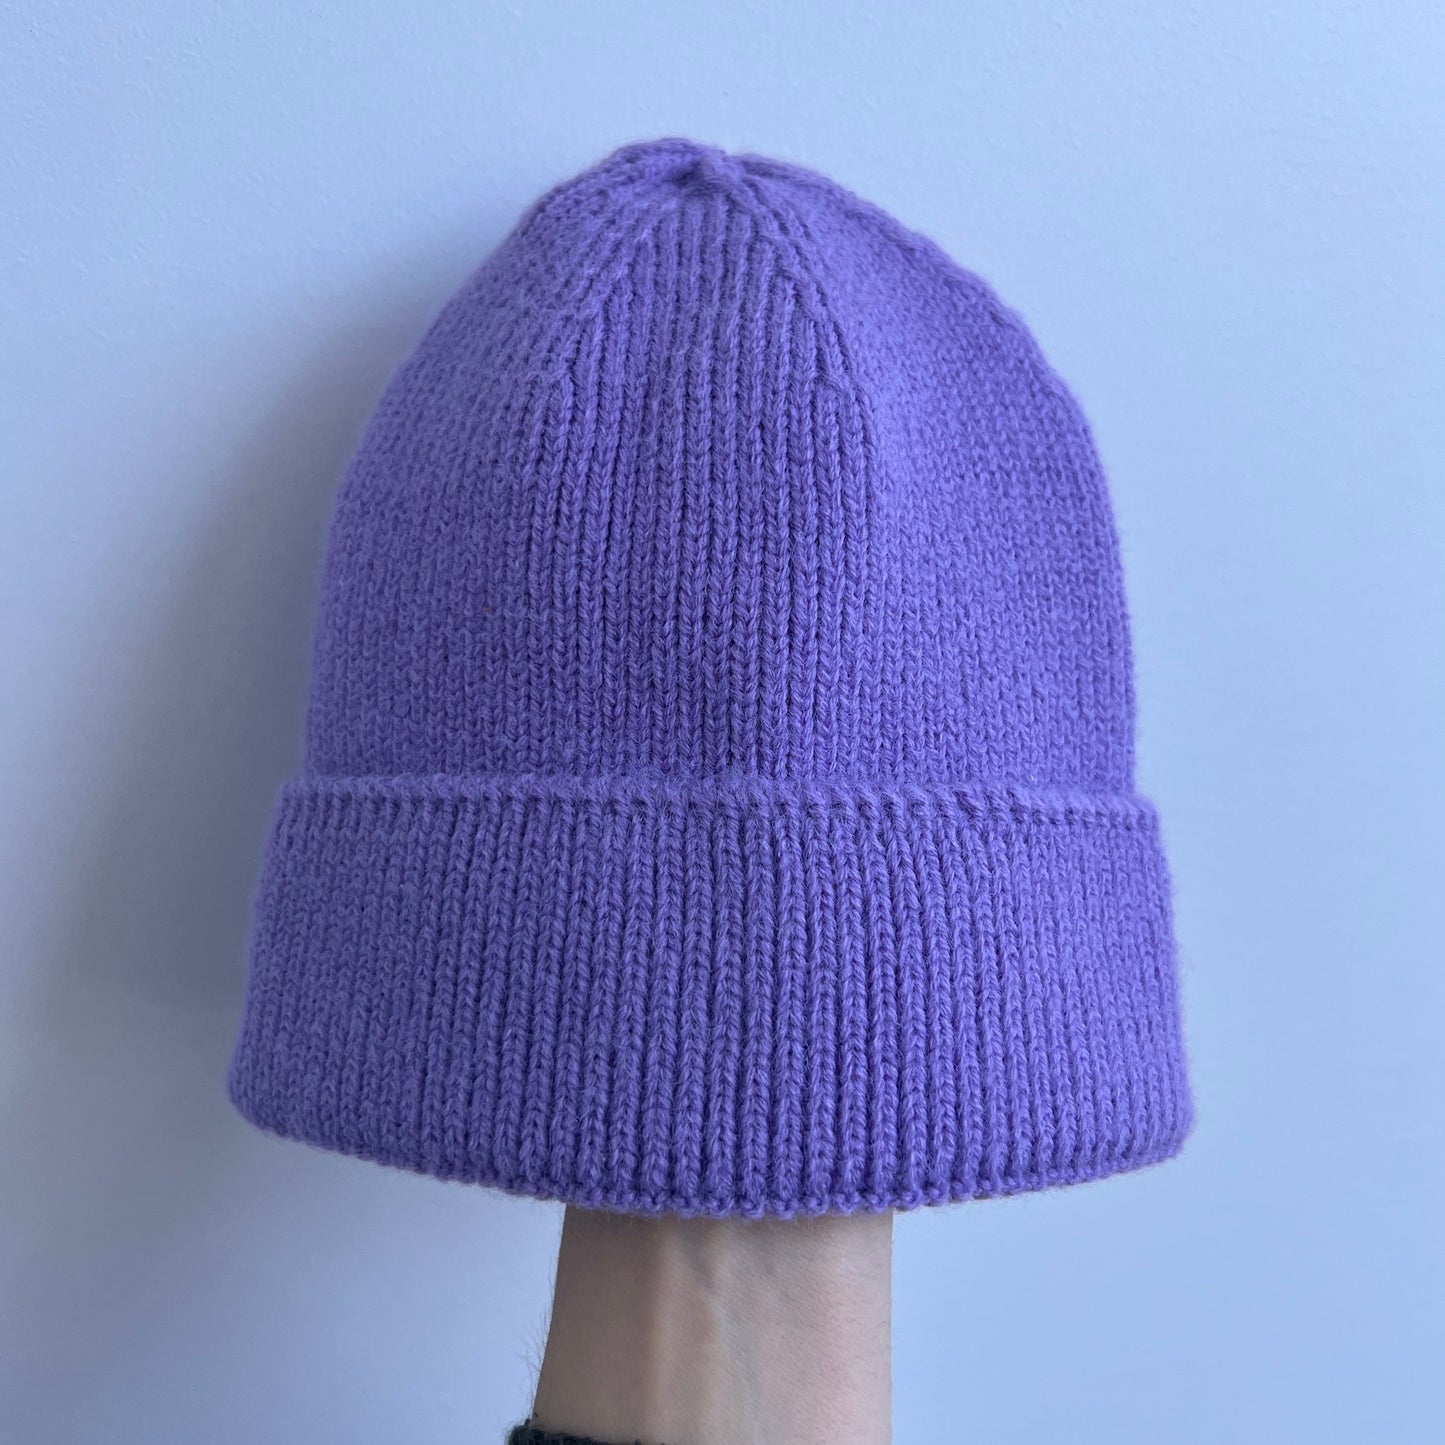 The Simple Beanie 1-4 Years Old | Winter Hat for Toddlers